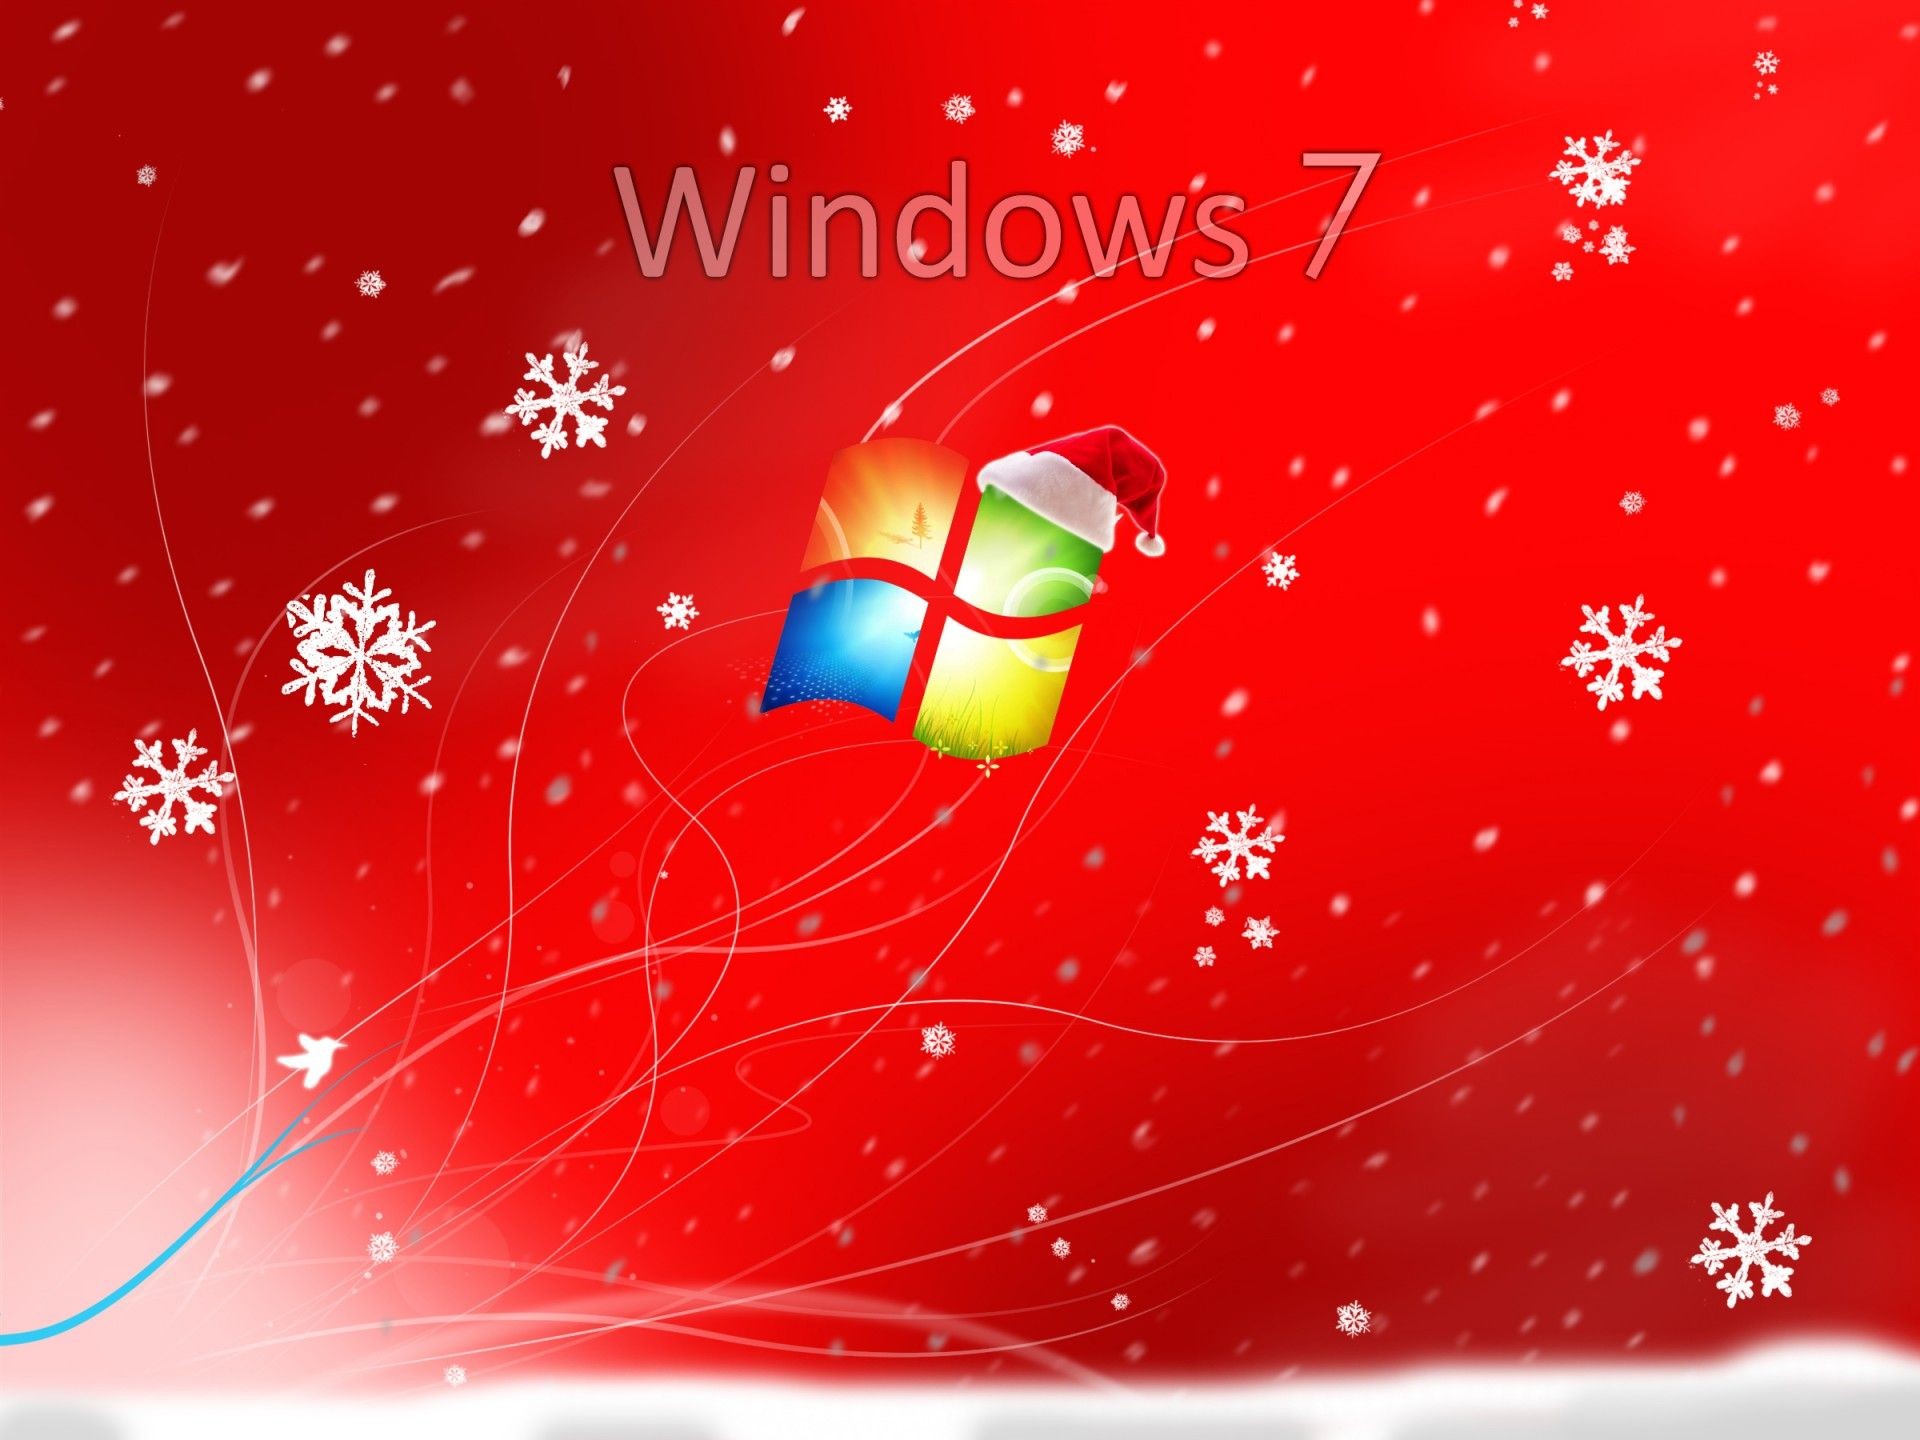 Free download Windows 7 Xmas Wallpaper 63 images [1920x1440] for your